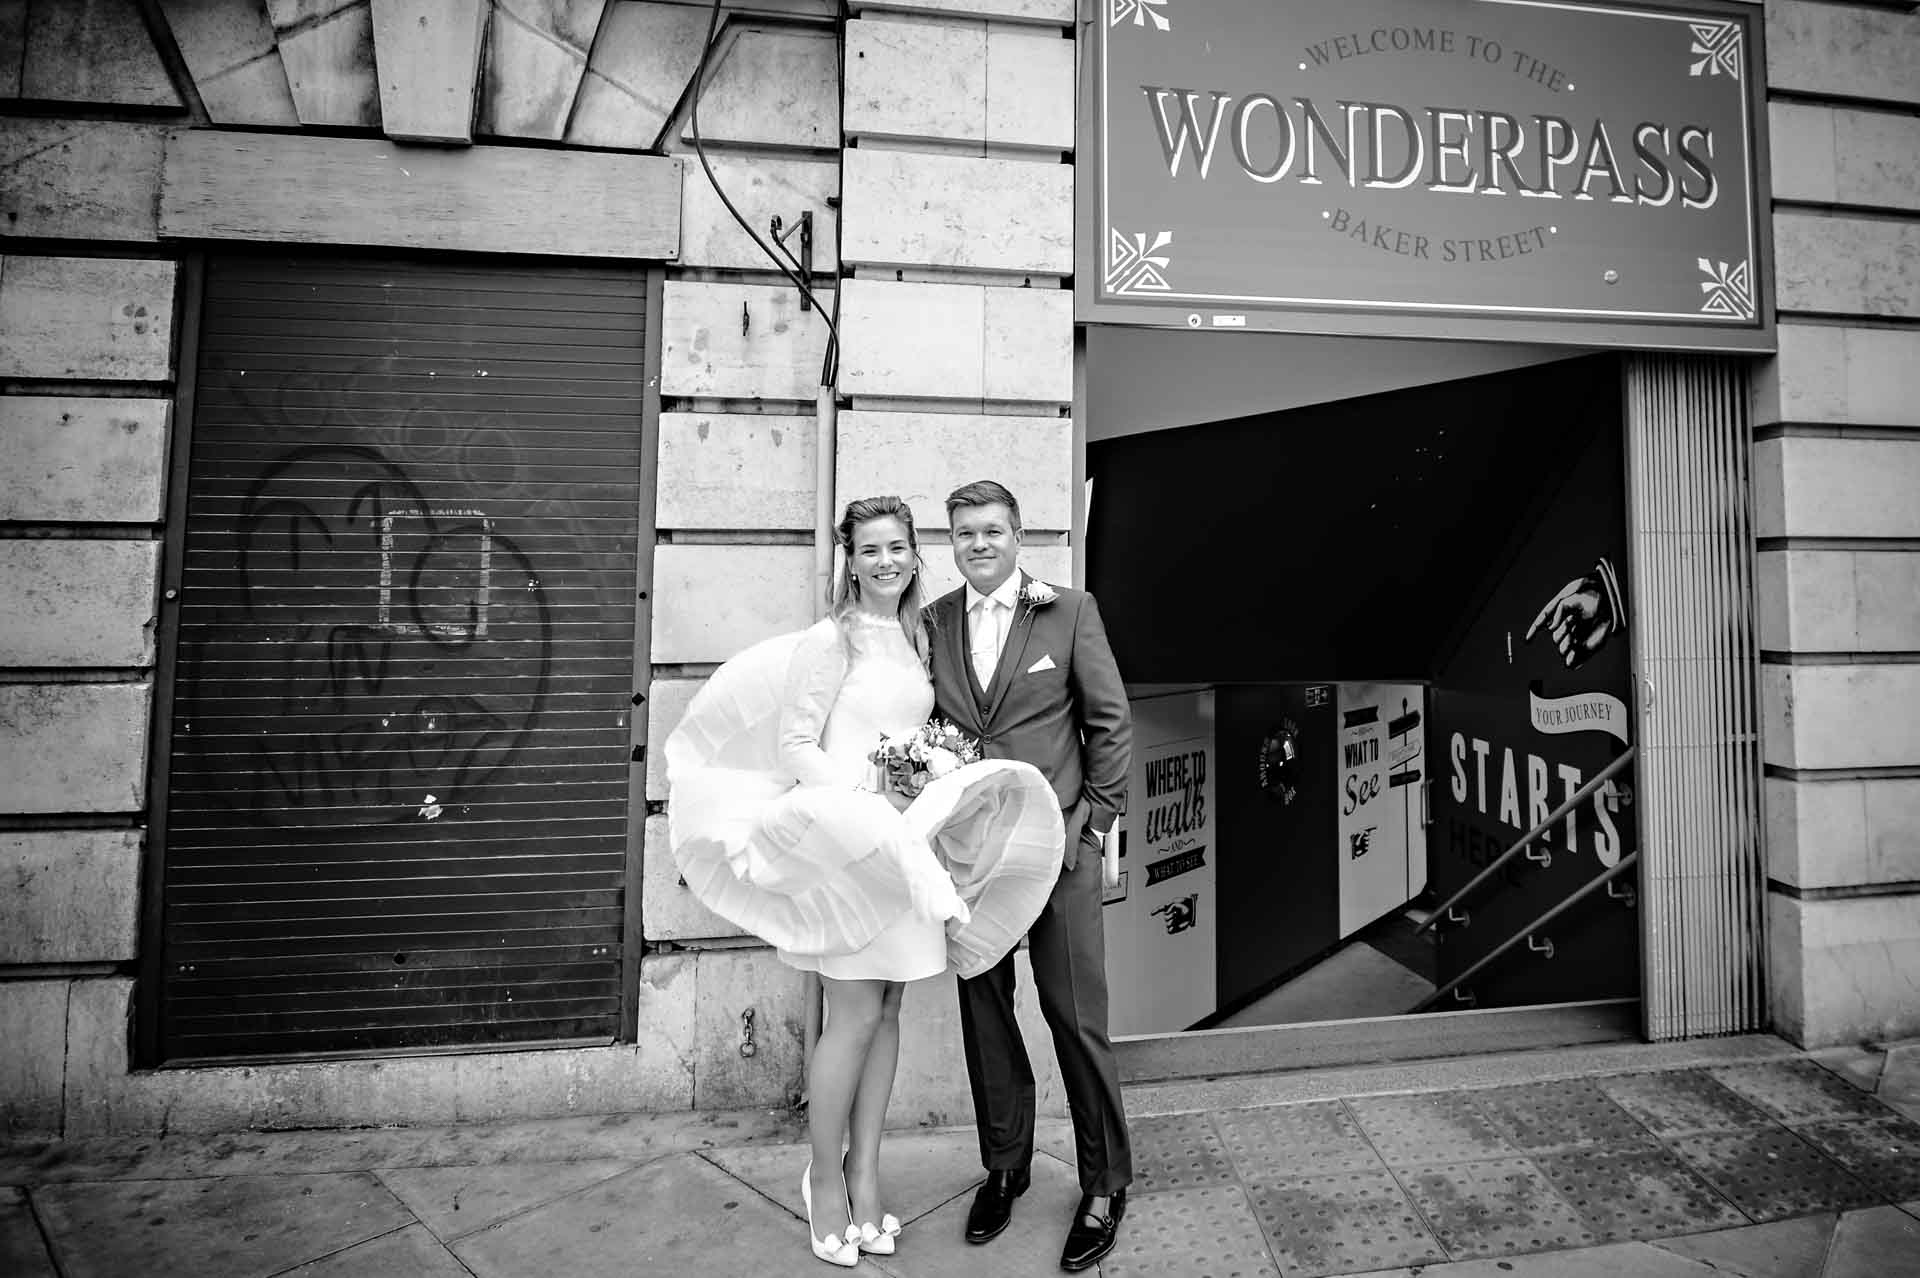 Wedding couple outside Baker Street Station - bride with dress flying up